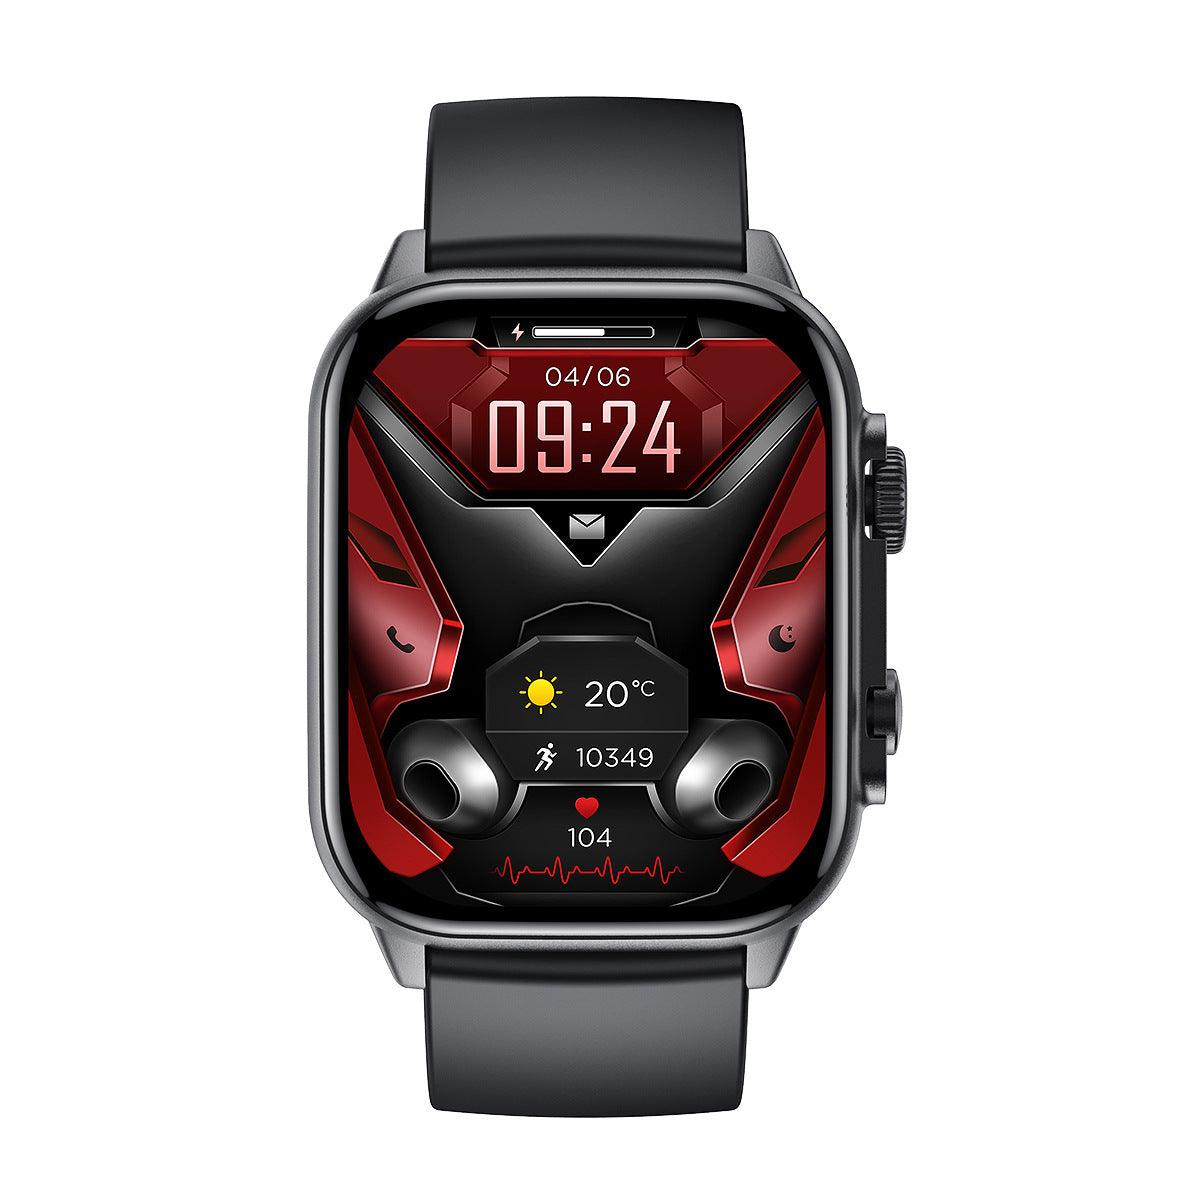 HK95 Sport Smart Watch - Featuring a Large Screen - Birdie Watches